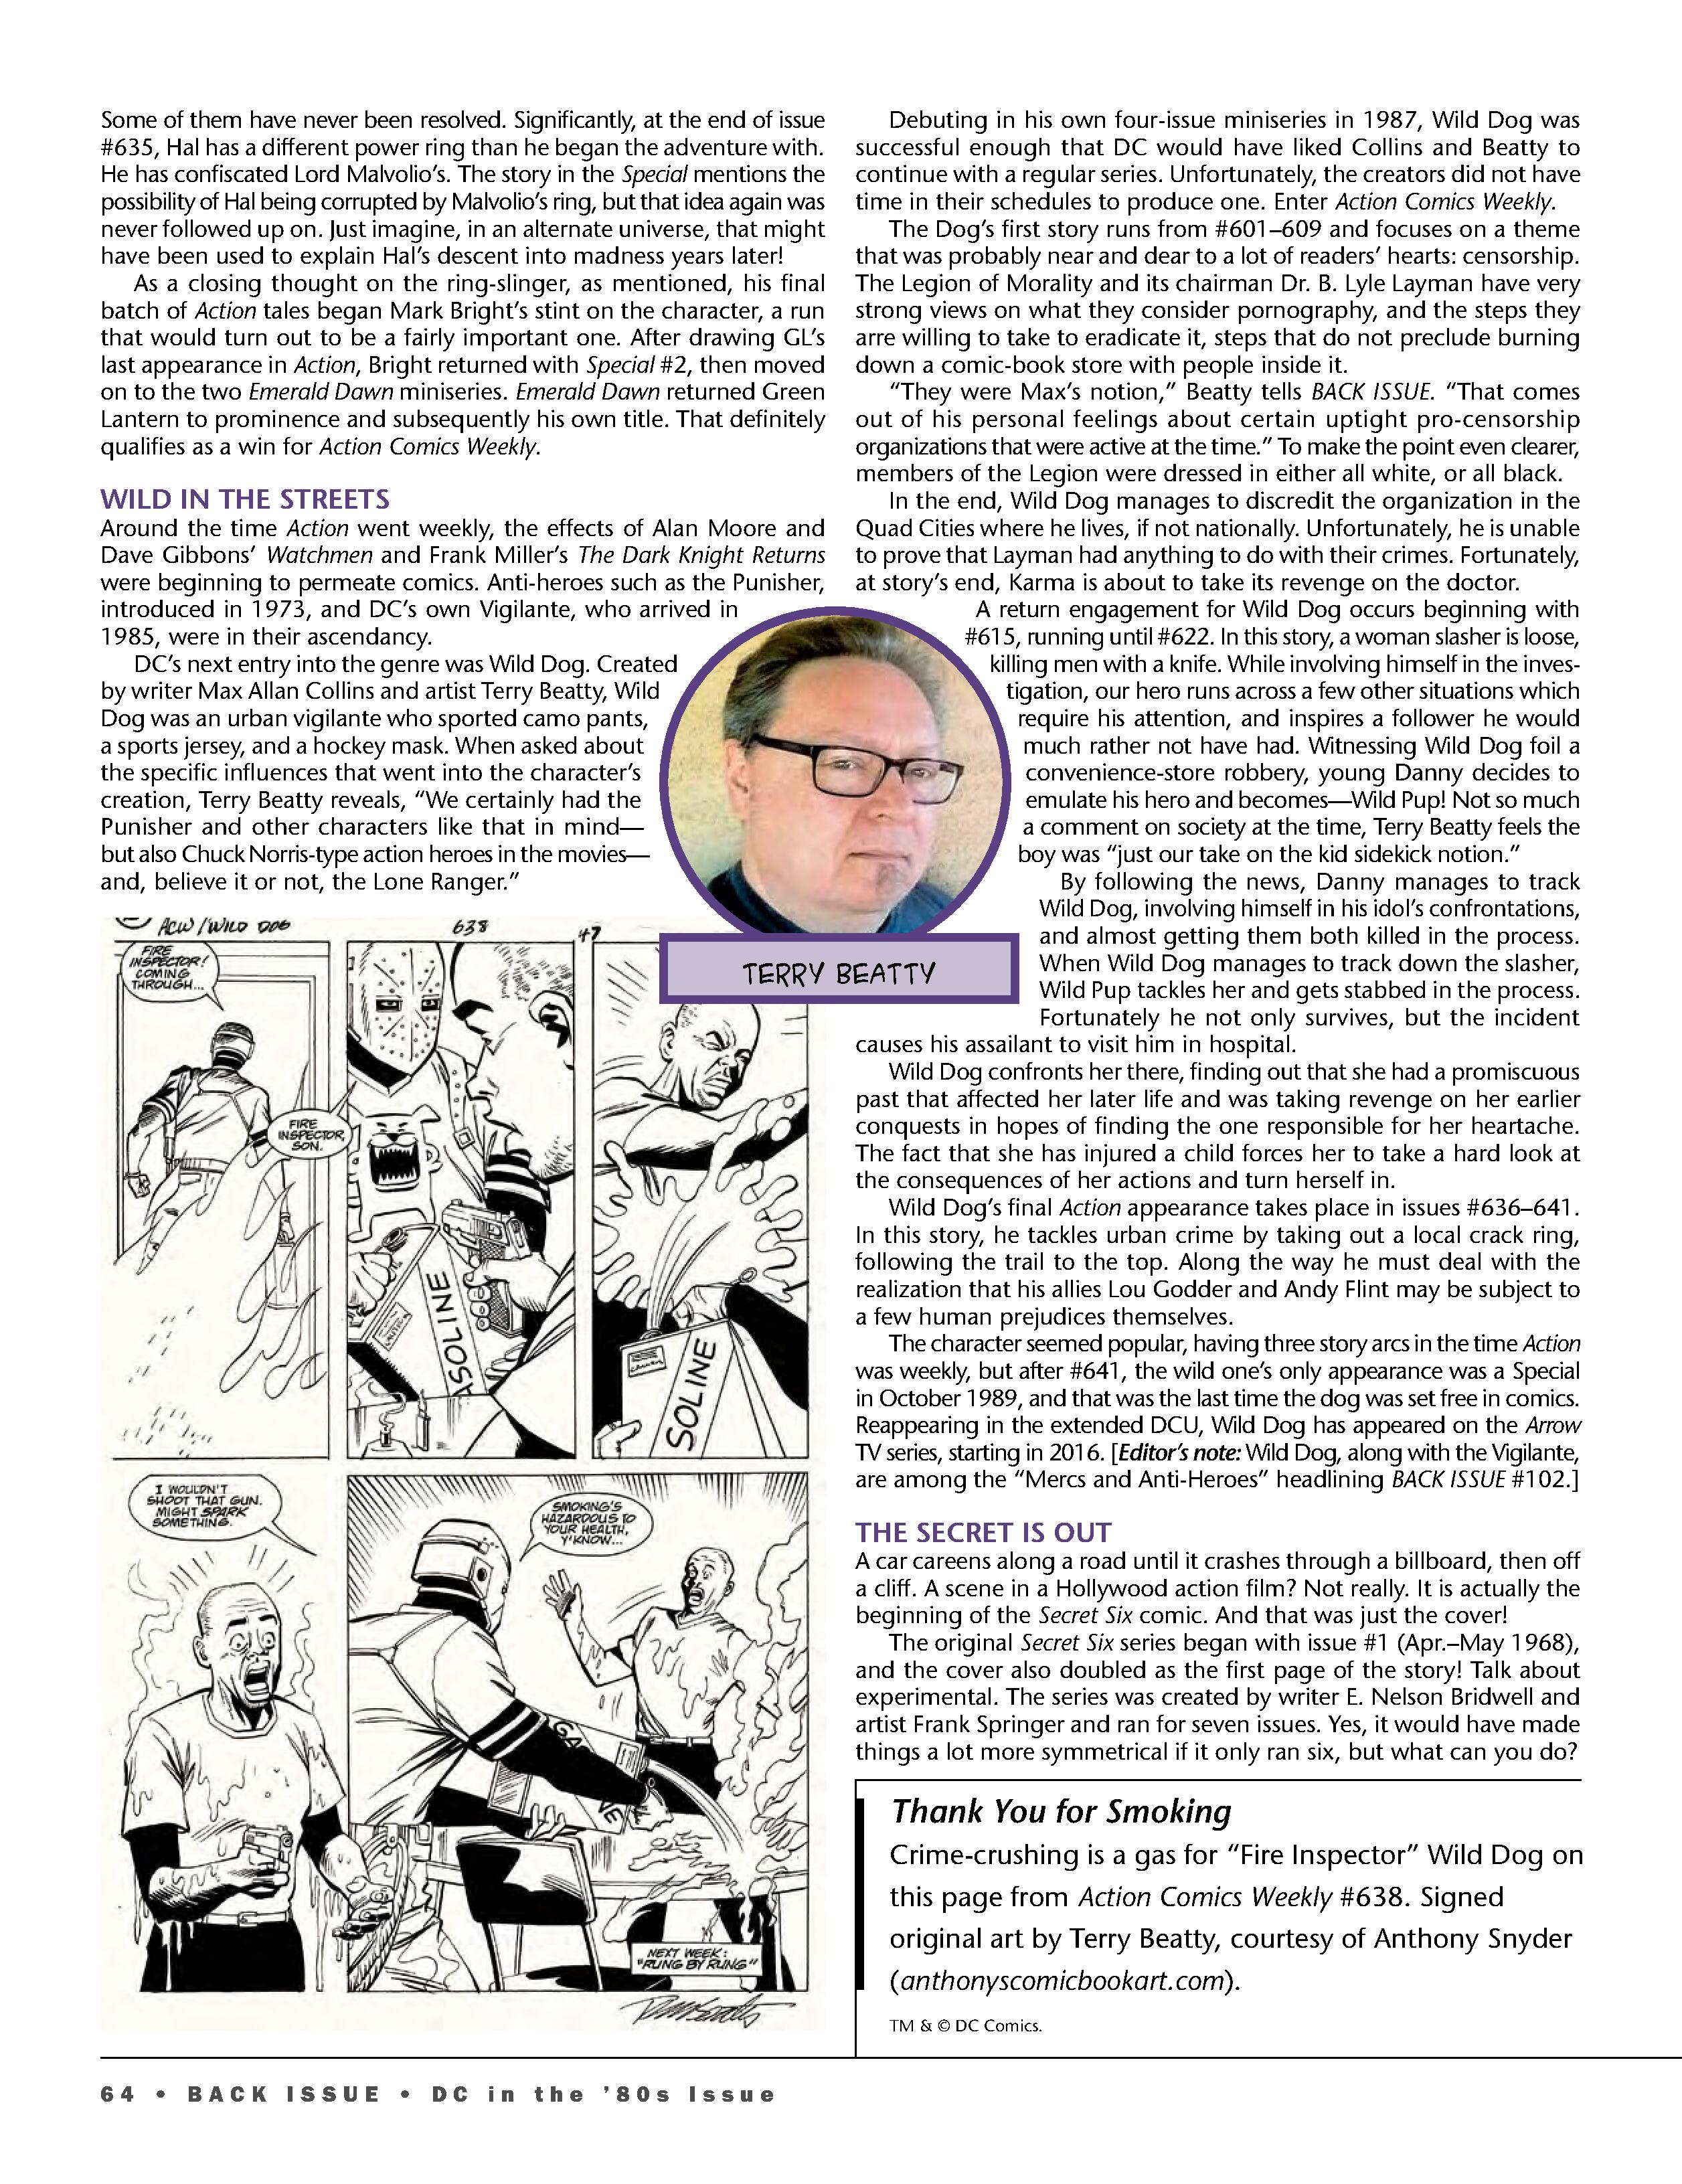 Read online Back Issue comic -  Issue #98 - 66